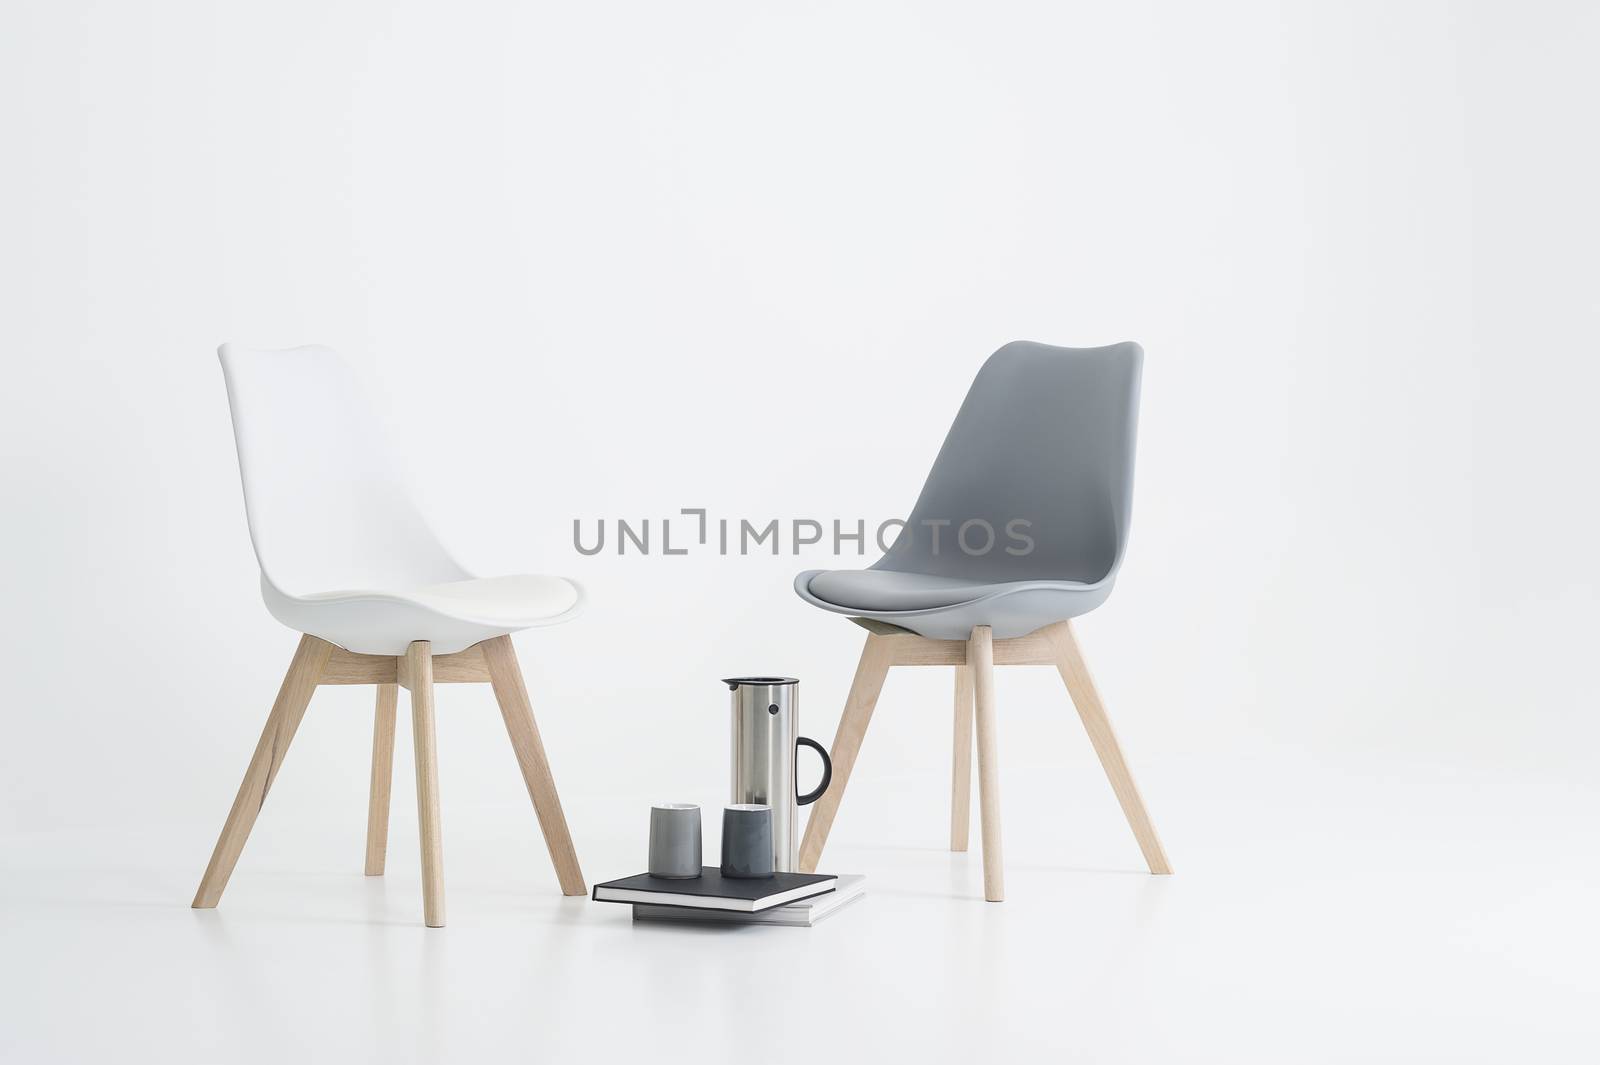 Two modern chairs with a serving of coffee in a stylish flask with two mugs resting on hardcover books on the floor in between, over white